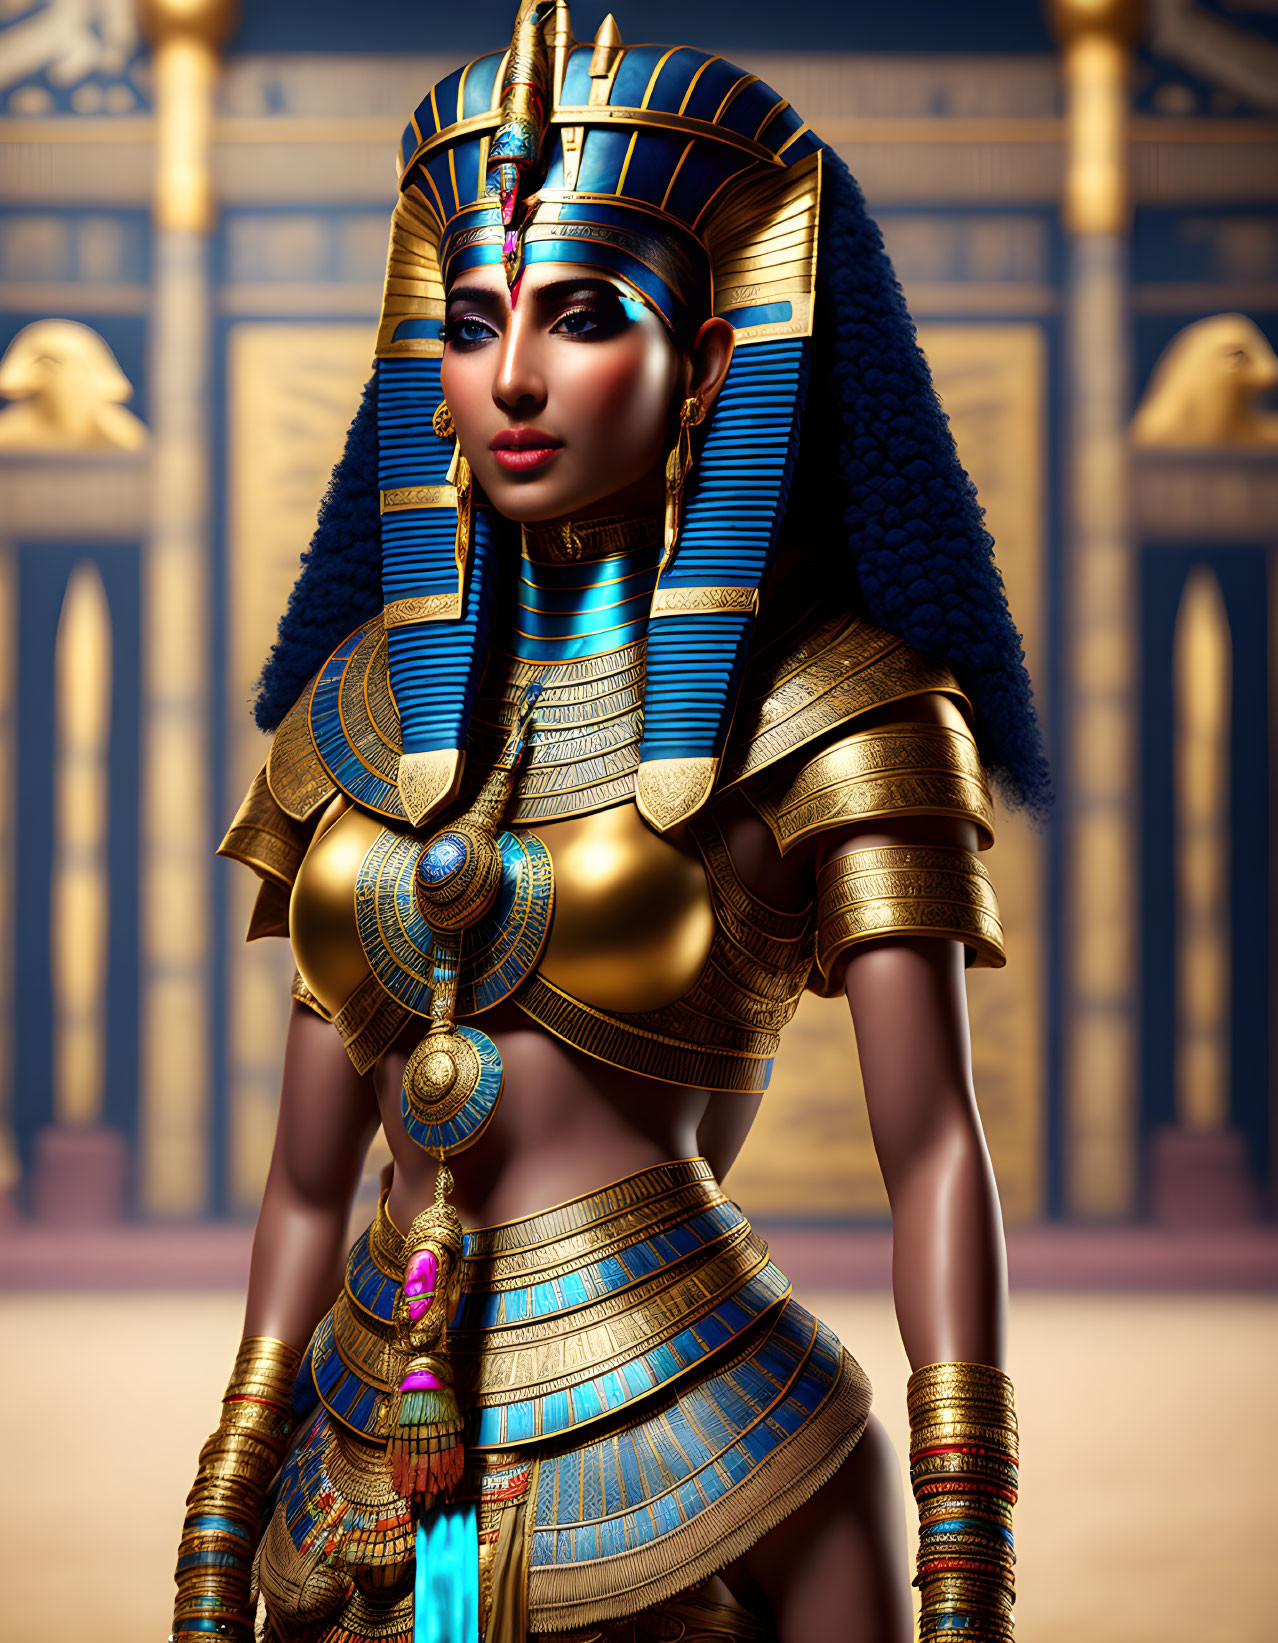 Cleopatra in her glory